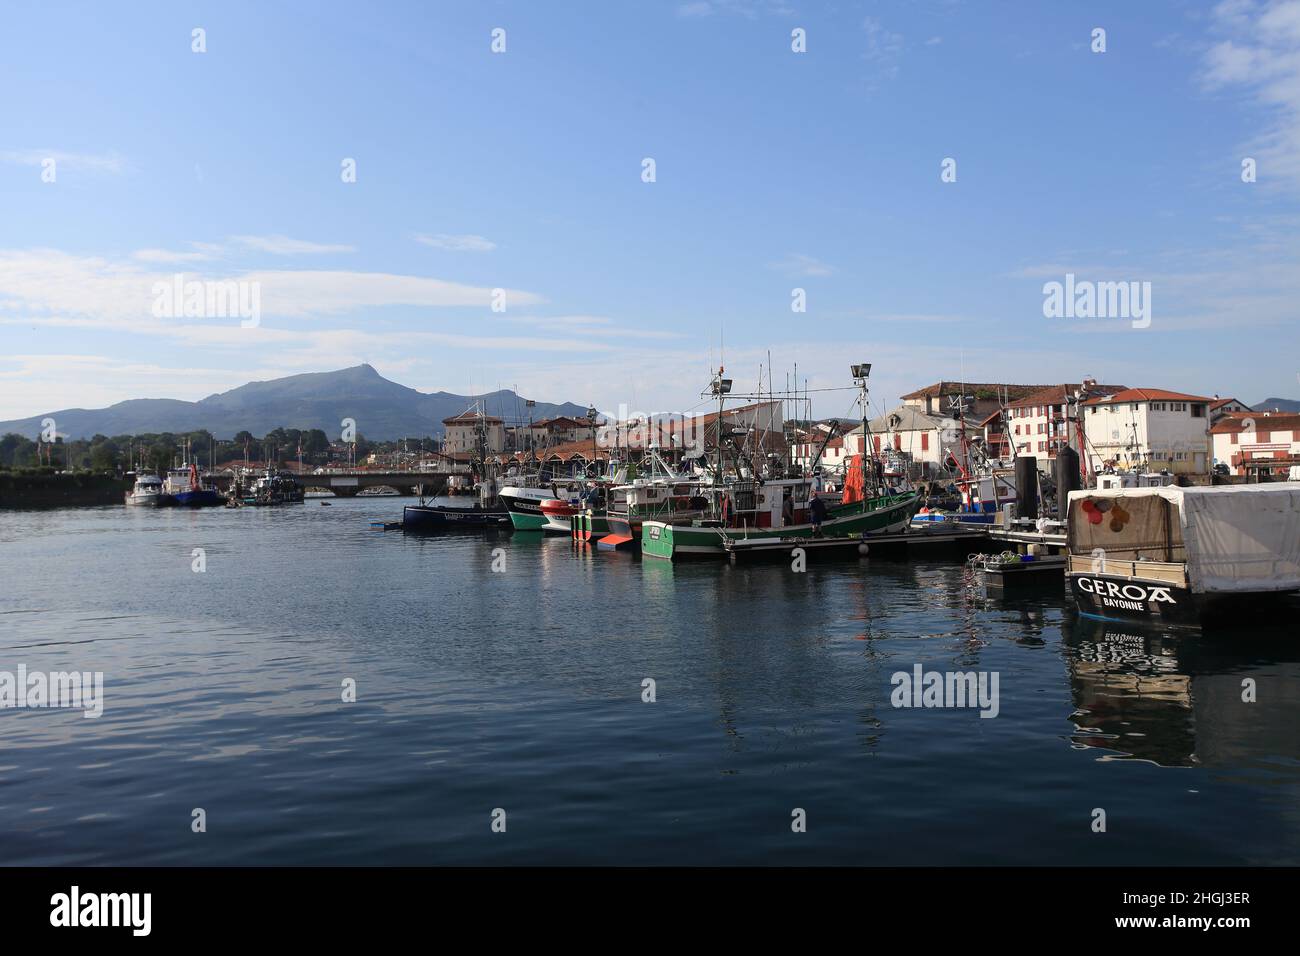 St Jean de Luz harbour at the mouth of the river Nivelle, with a clear view of La Rhune mountain in the background, France, Pays Basque. Stock Photo